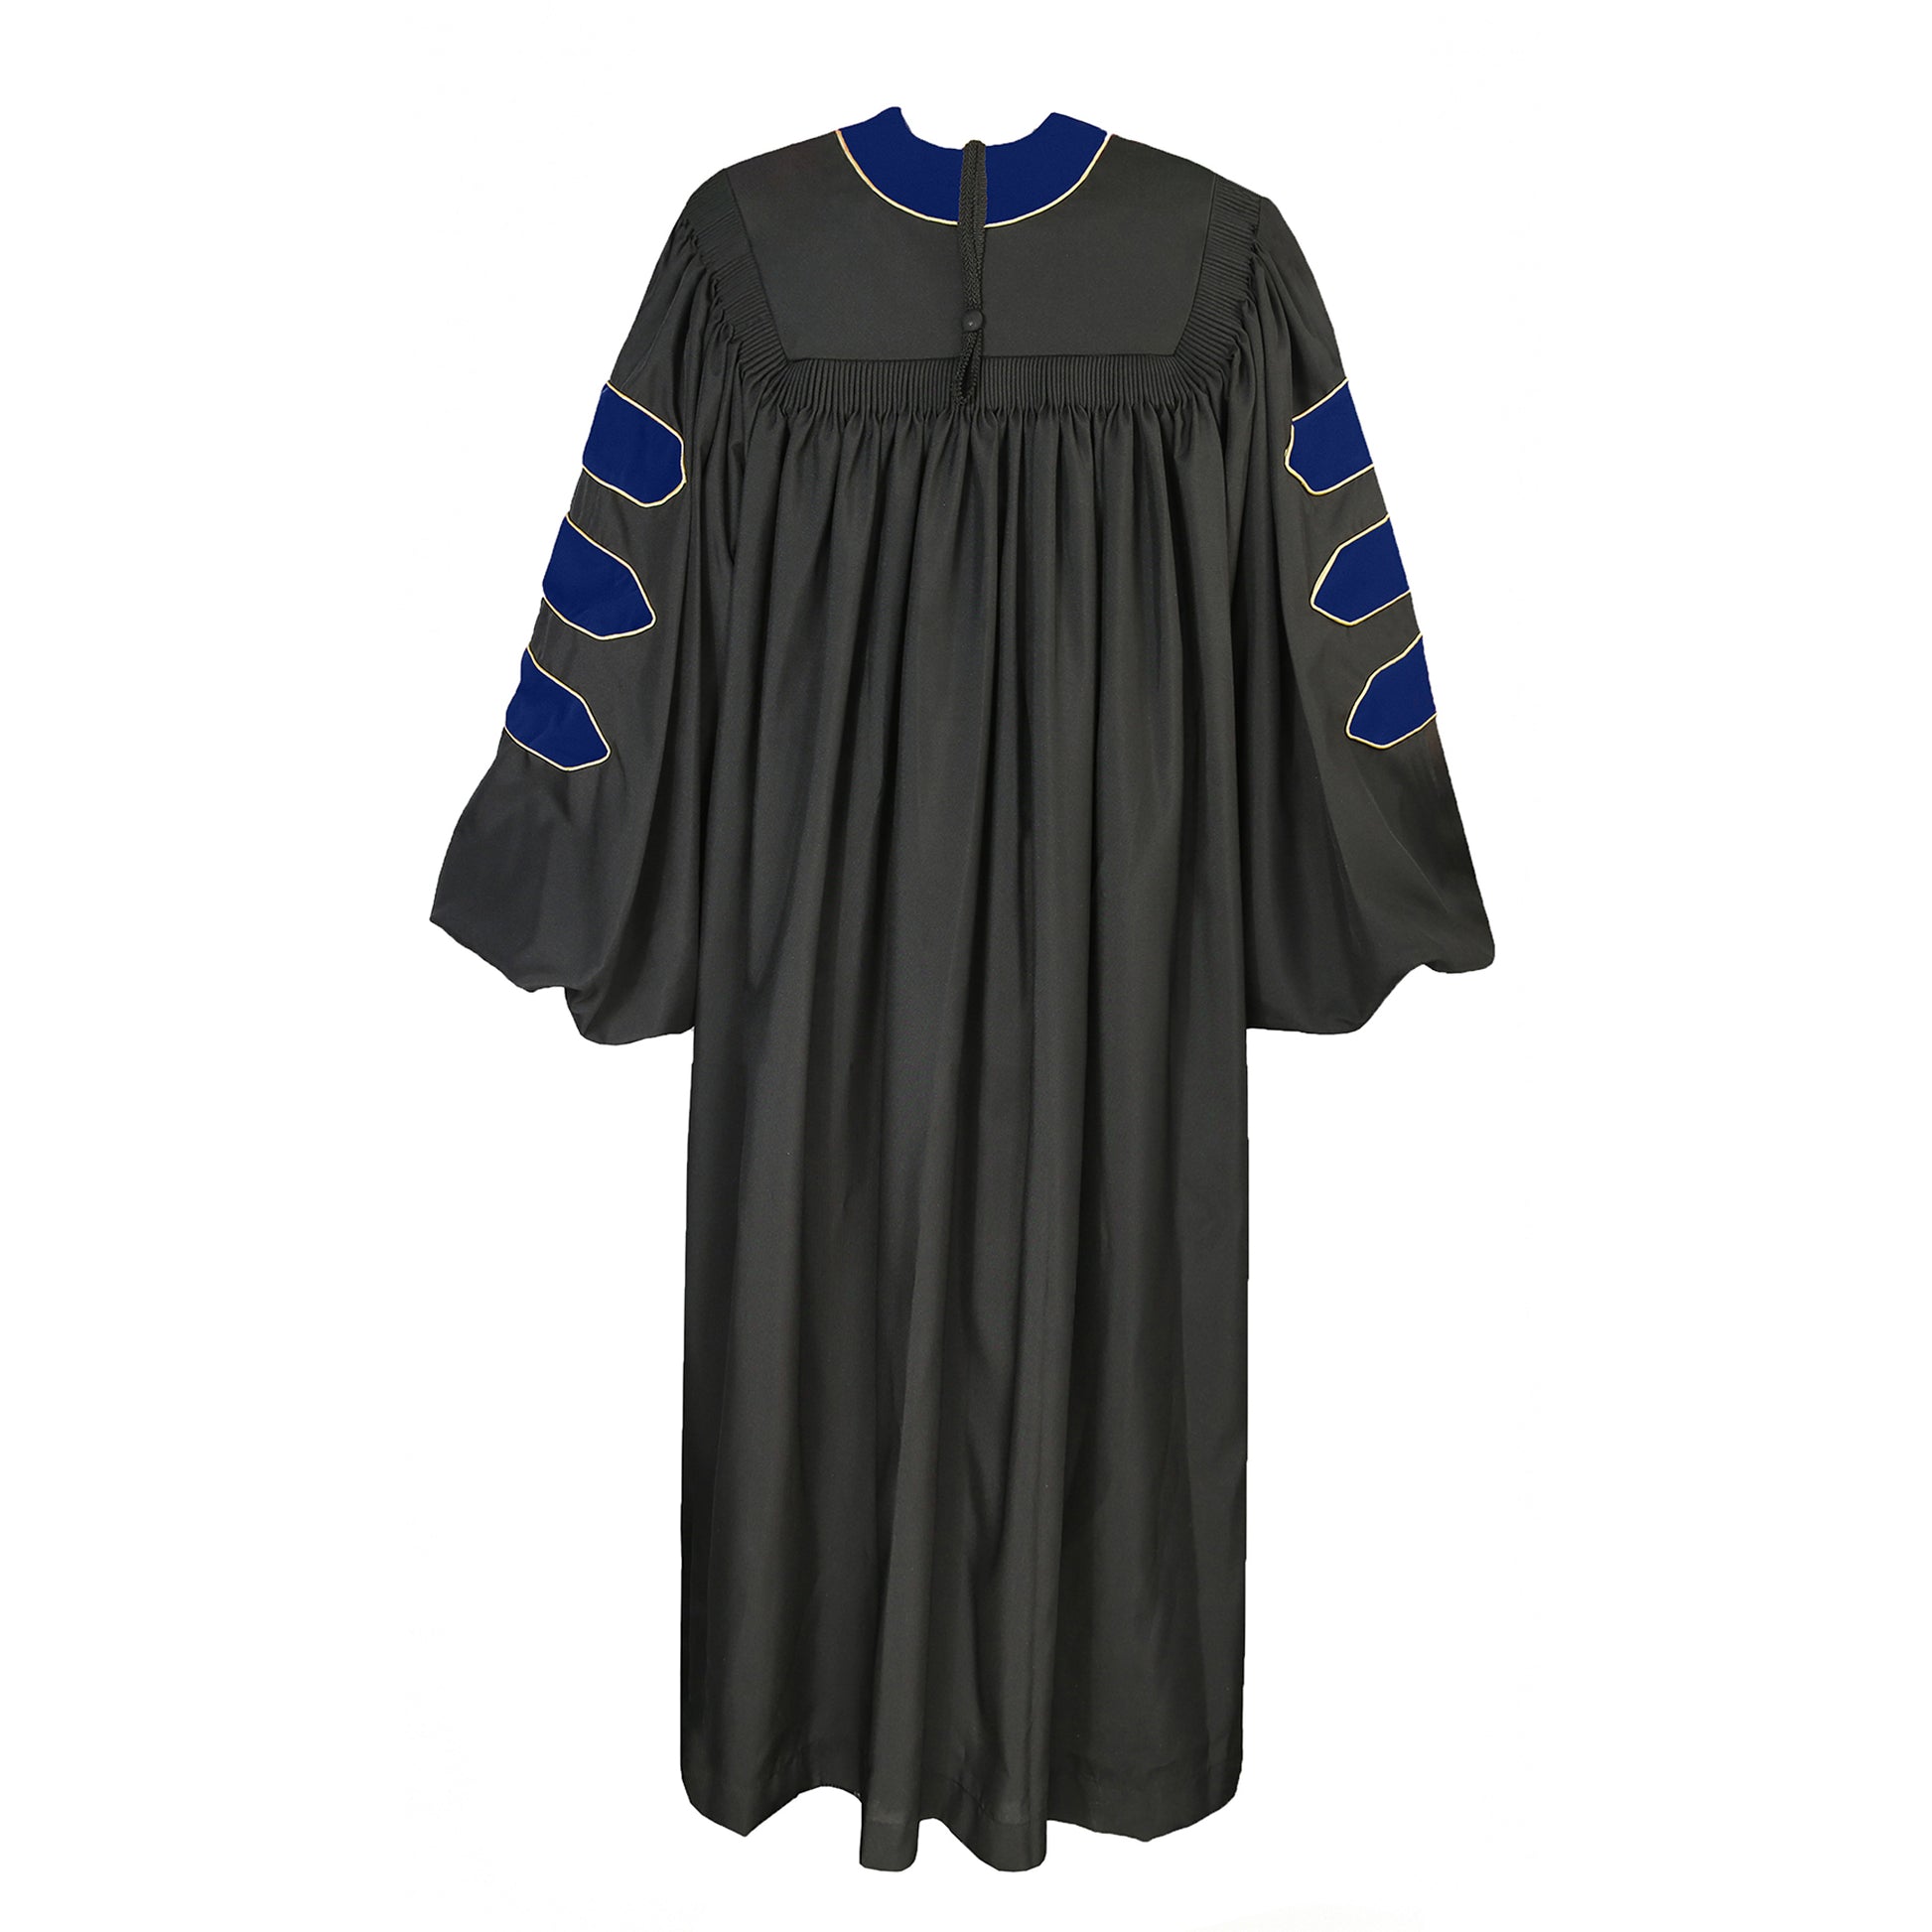 Phd Gown/ Deluxe Doctoral Regalia for Professor or Faculty with Gold Piping